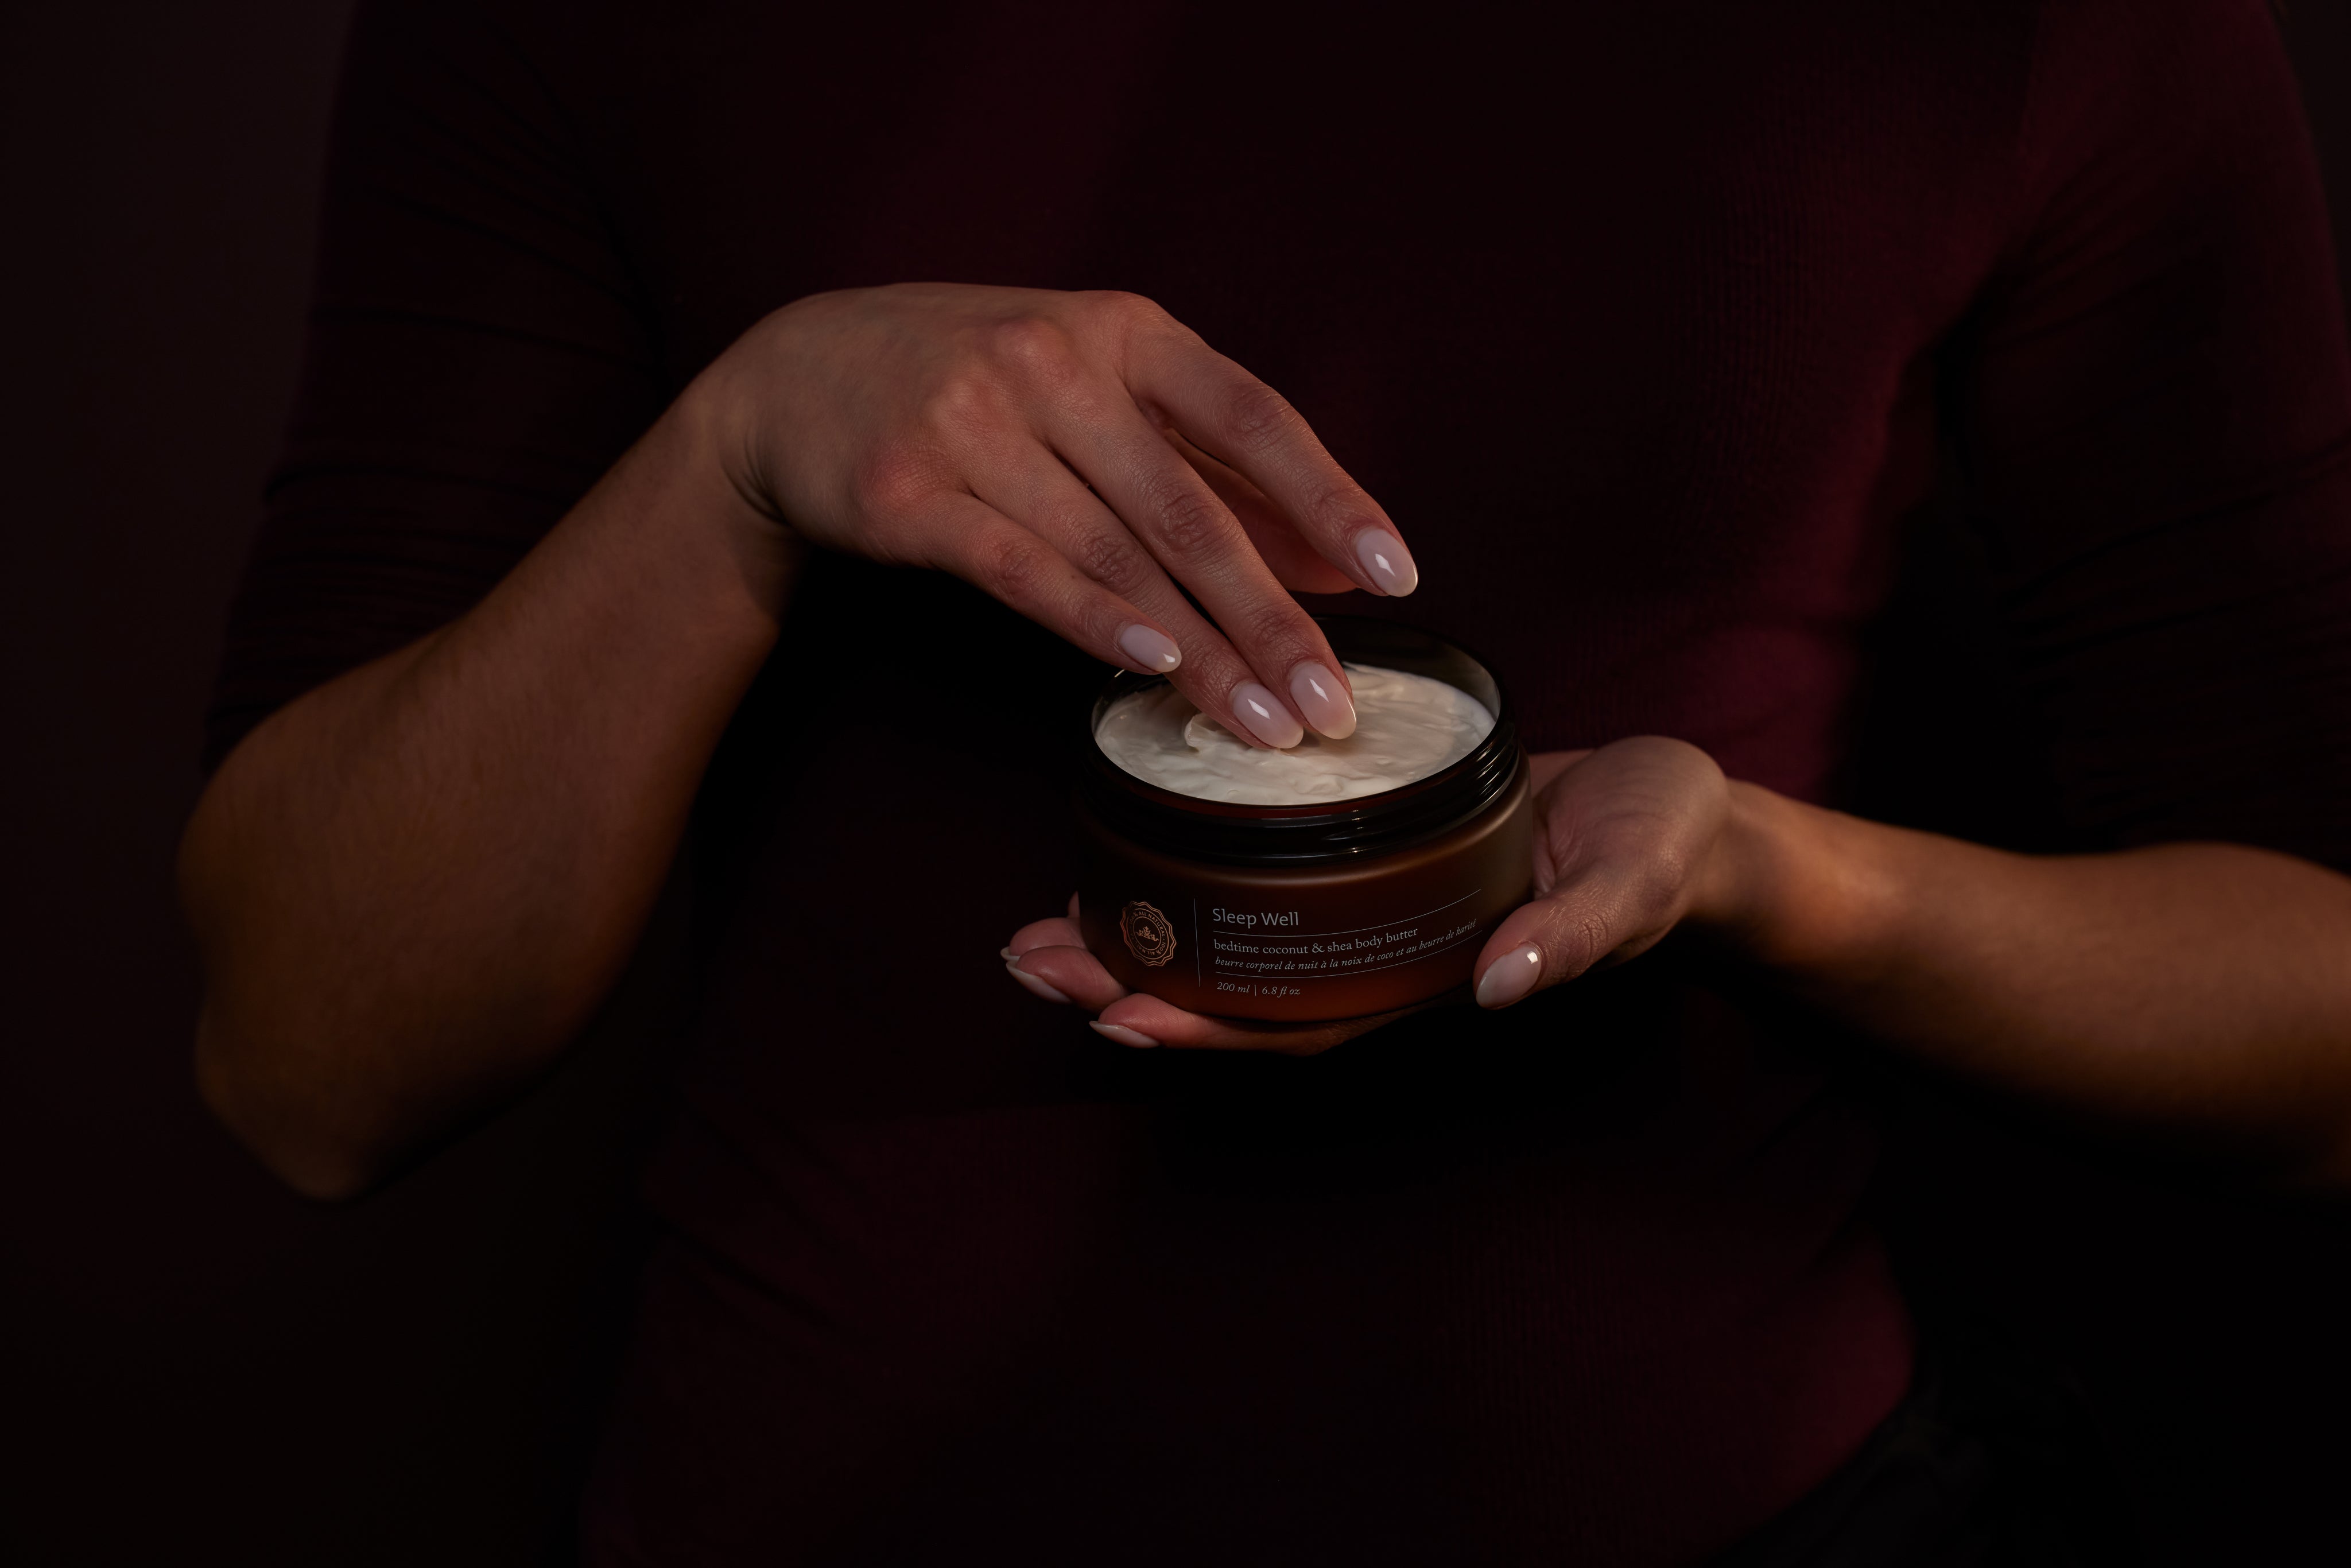 A person scooping sleep well body butter out of the container